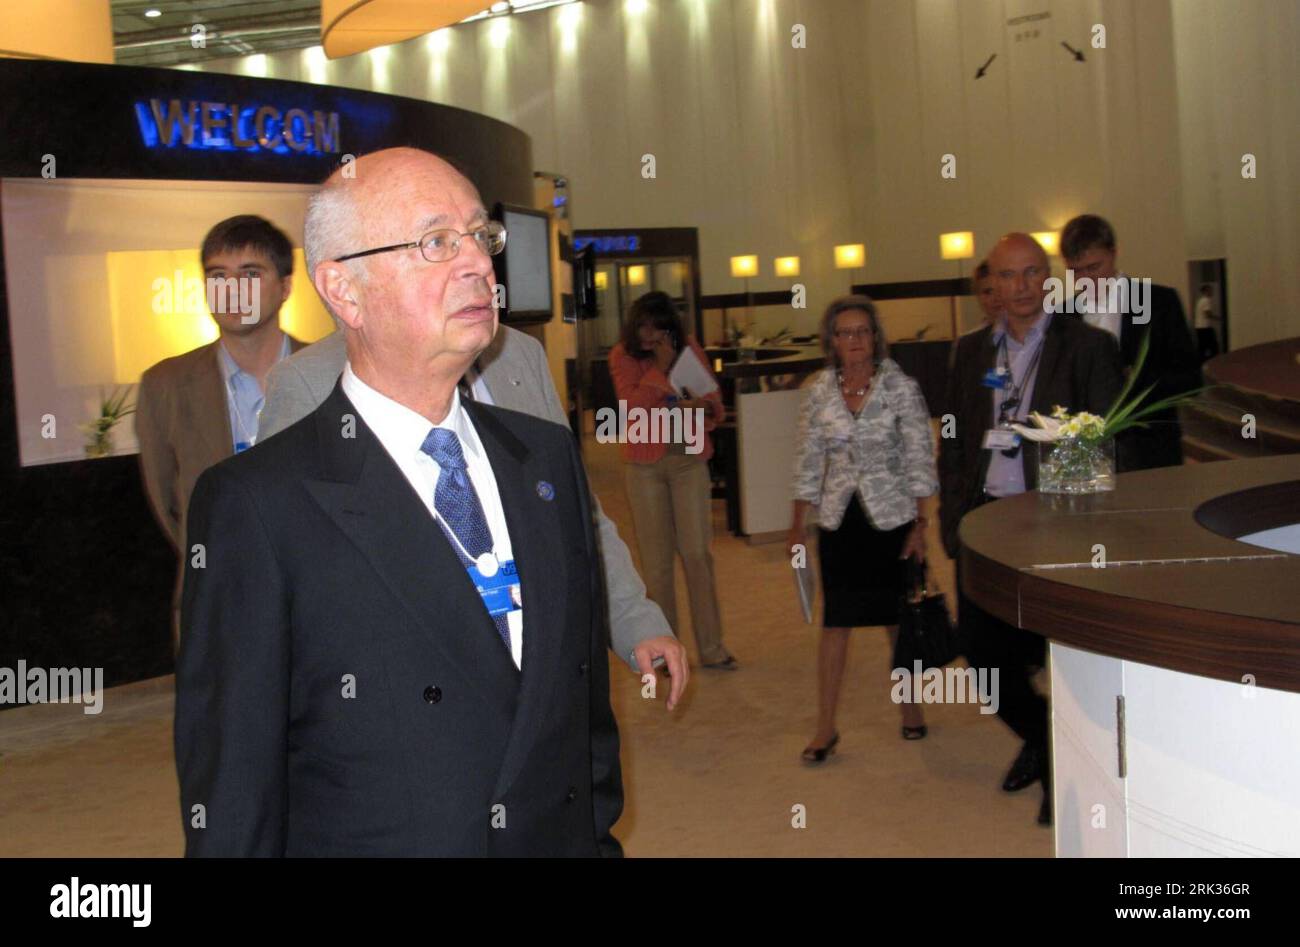 Bildnummer: 53333735  Datum: 09.09.2009  Copyright: imago/Xinhua (090909) -- DALIAN, Sept. 9, 2009 (Xinhua) -- Klaus Schwab, Founder and Executive Chairman of World Economic Forum, inspects the venue of the Annual Meeting of the New Champions 2009, or Summer Davos, in Dalian, northeast China s Liaoning Province, Sept. 9, a day ahead of the opening of the meeting. (Xinhua/Yan Ping) (ypf) (DAVOS 2009)(1)CHINA-DALIAN-DAVOS-SCHWAB-INSPECTION PUBLICATIONxNOTxINxCHN Vorschau New Champions Weltwirtschaftsforum China premiumd kbdig xsp 2009 quer o00 People o00 Sommerforum    Bildnummer 53333735 Date 0 Stock Photo